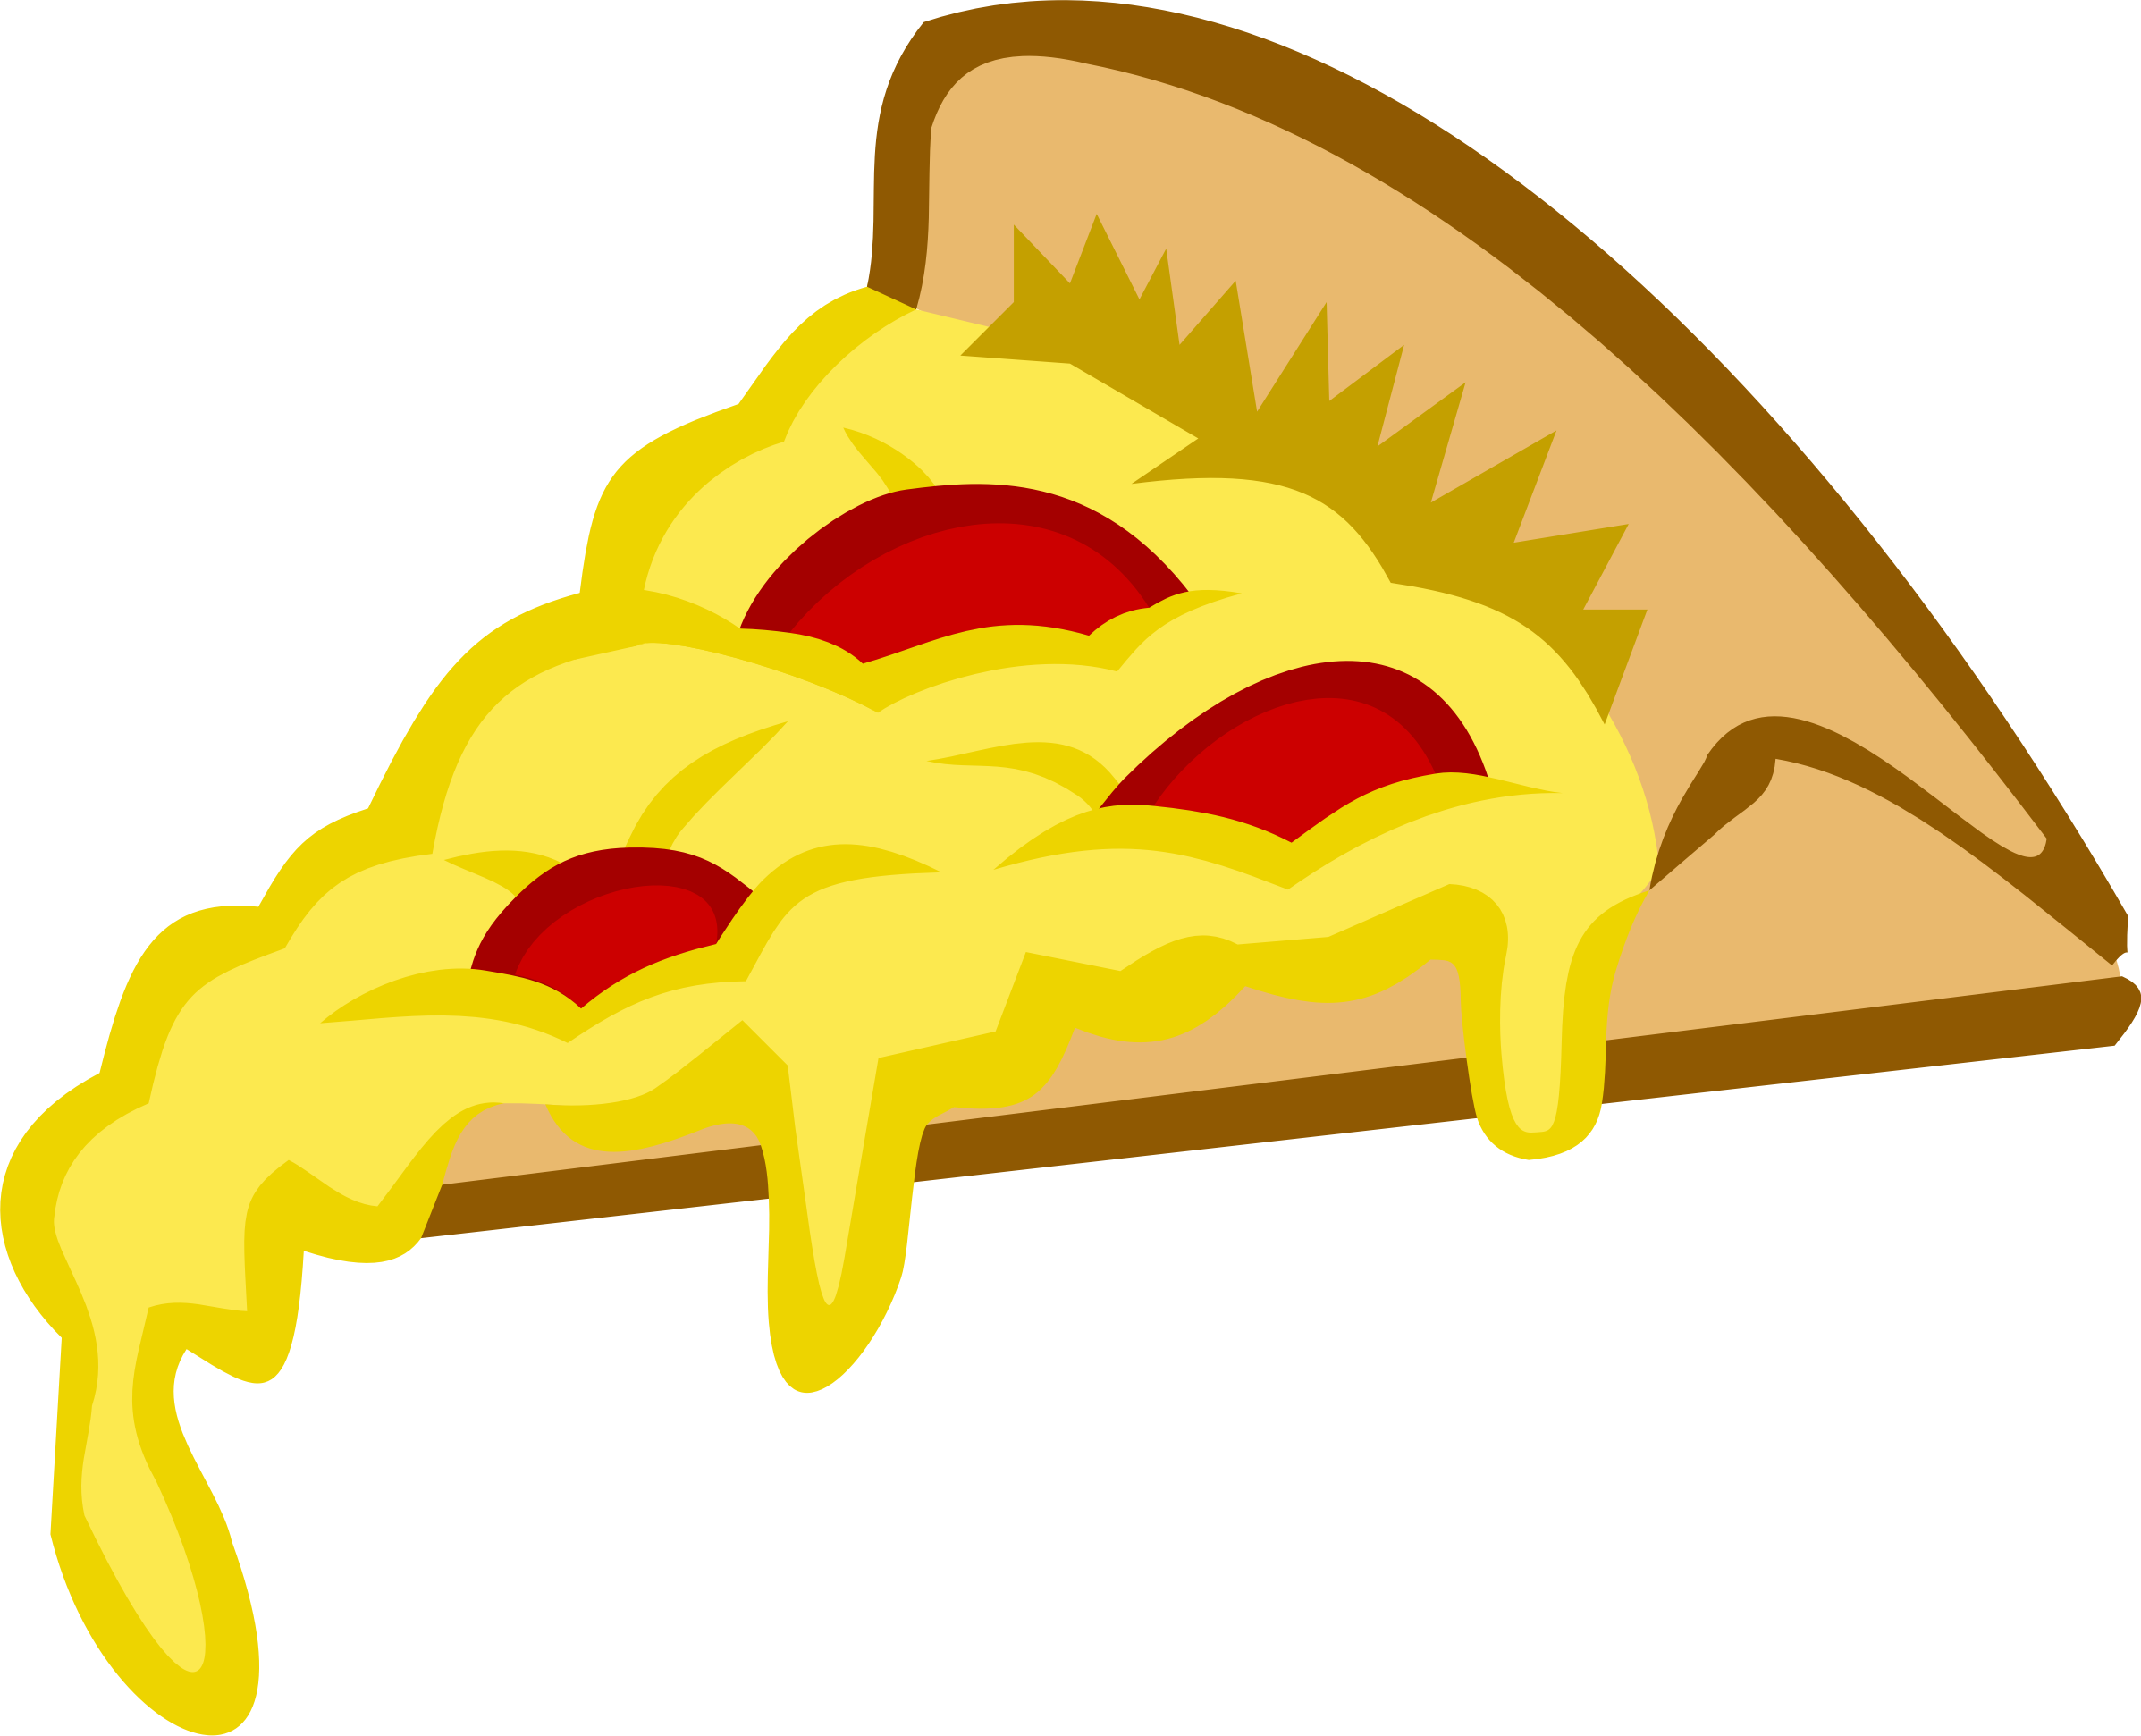 Purple clipart pizza.  at getdrawings com